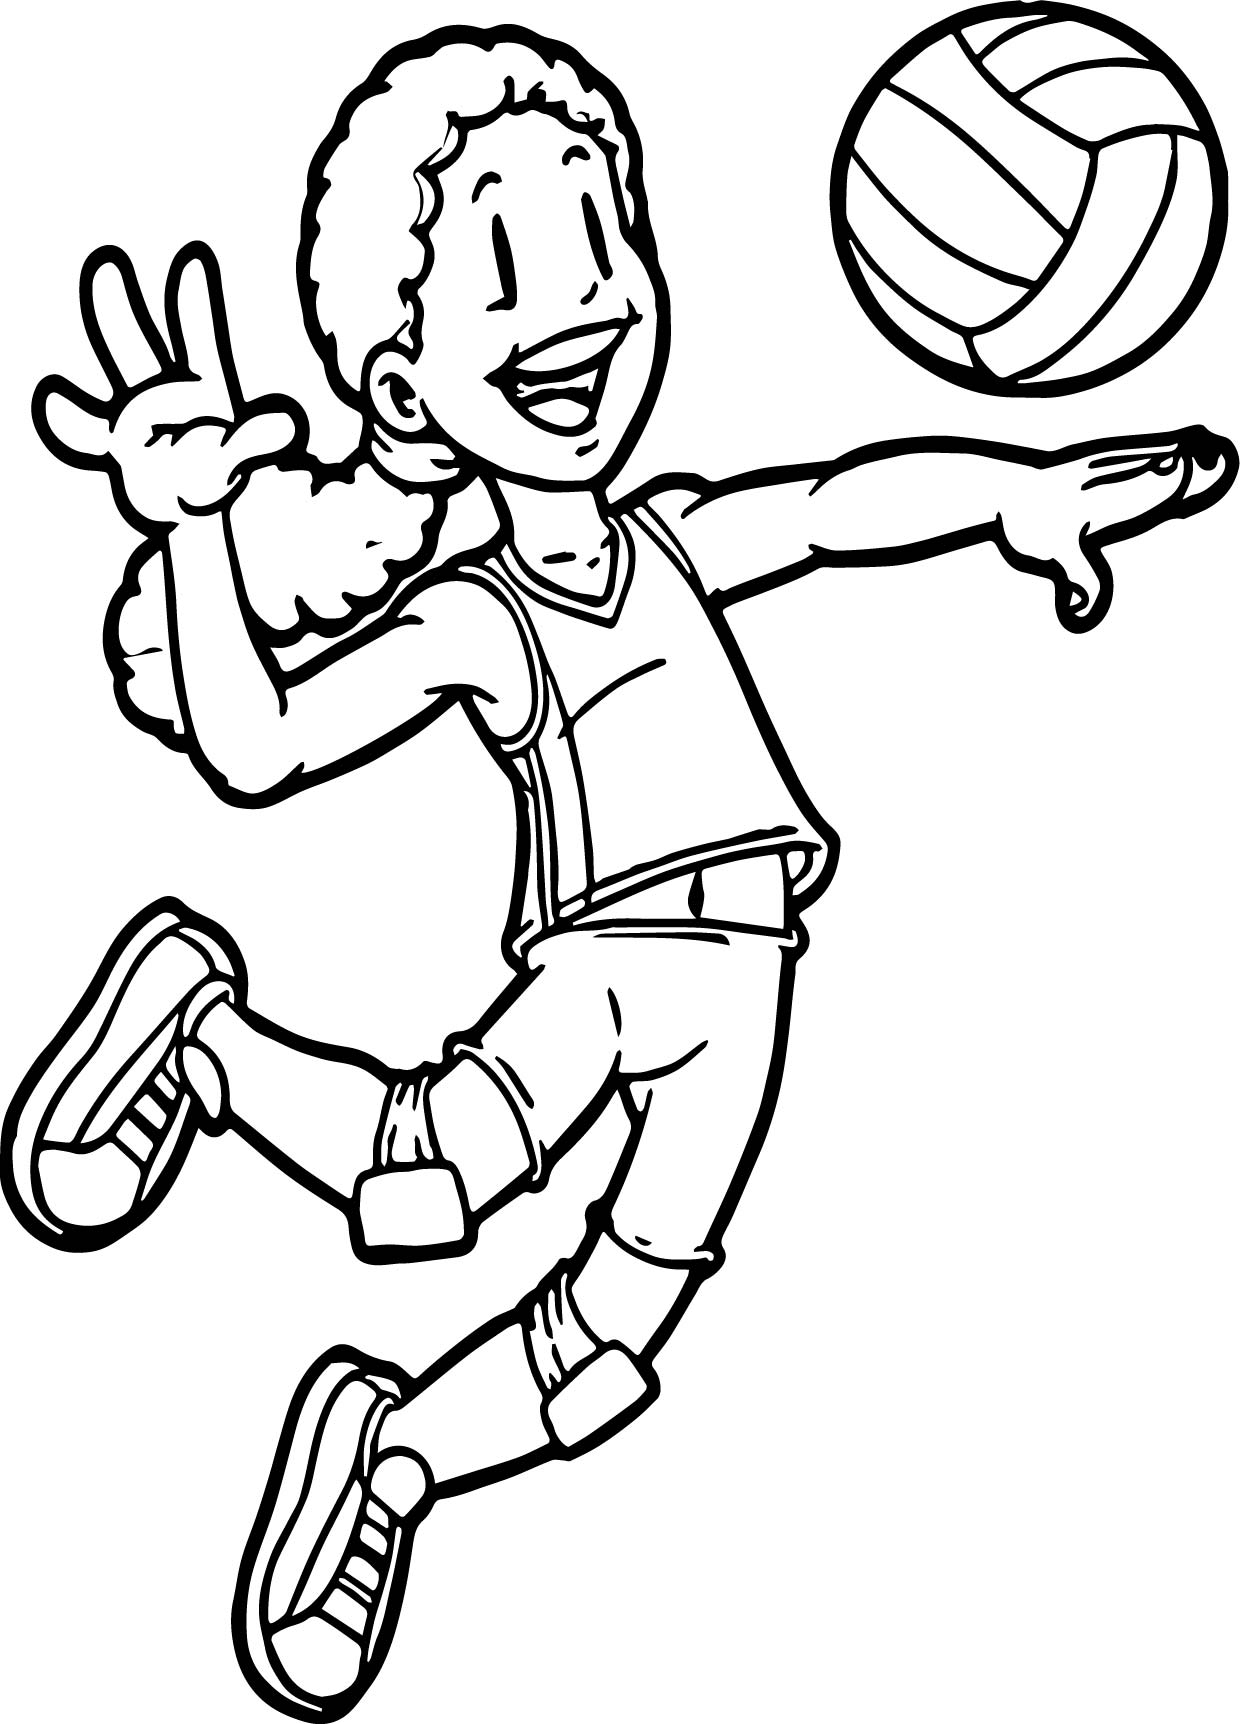 Coloring Pages : Most Superlative Volleyball Coloring Kids Playing ...